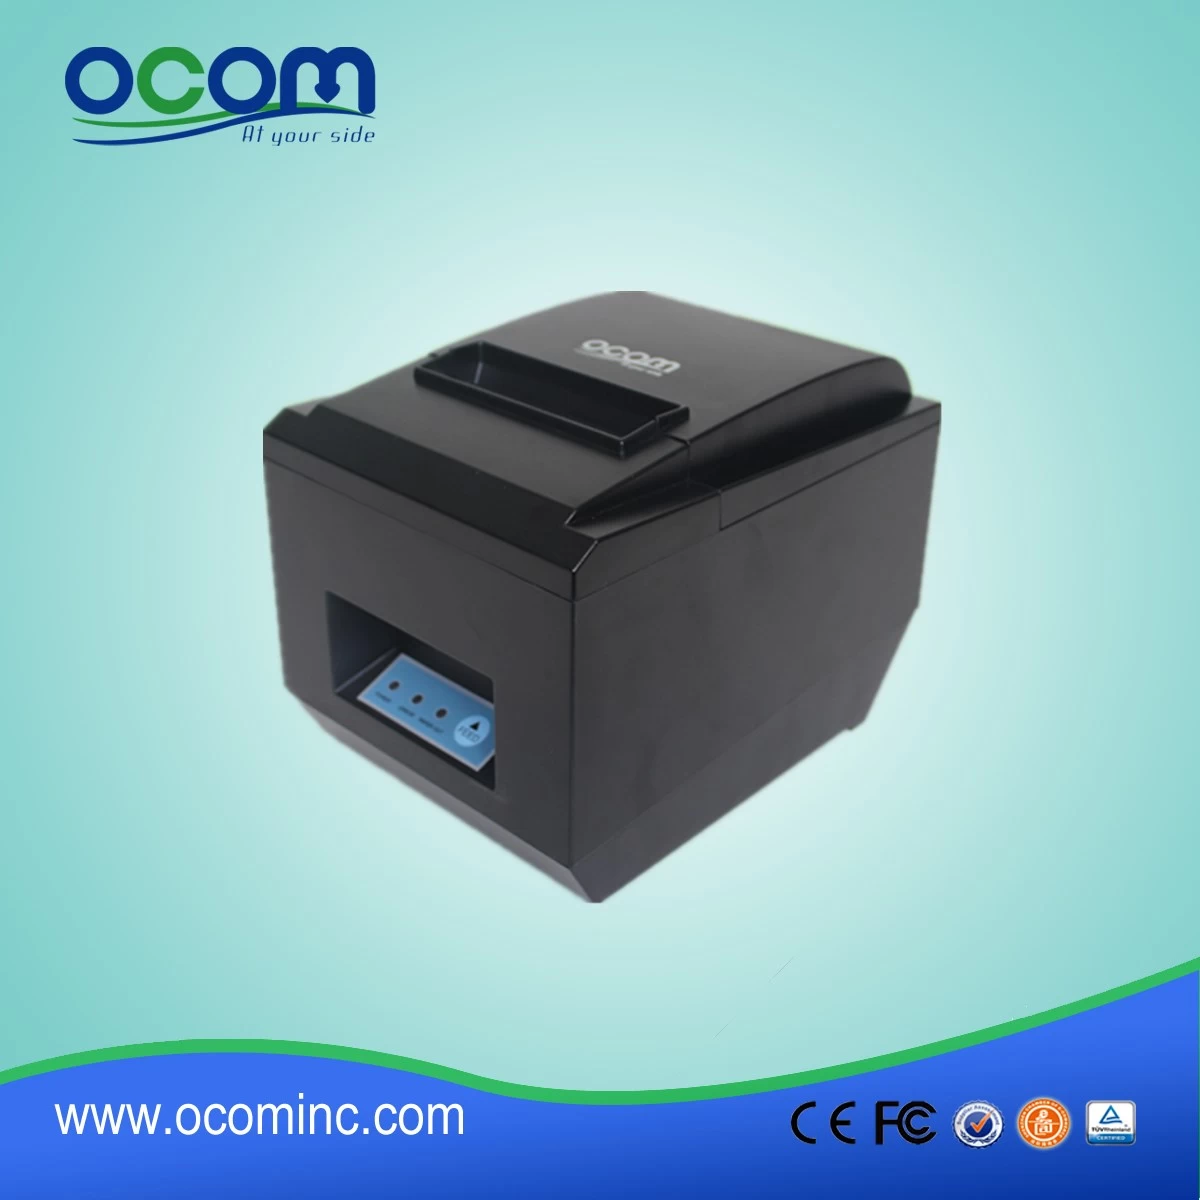 China high quality and low cost POS receipt printer-OCPP-809